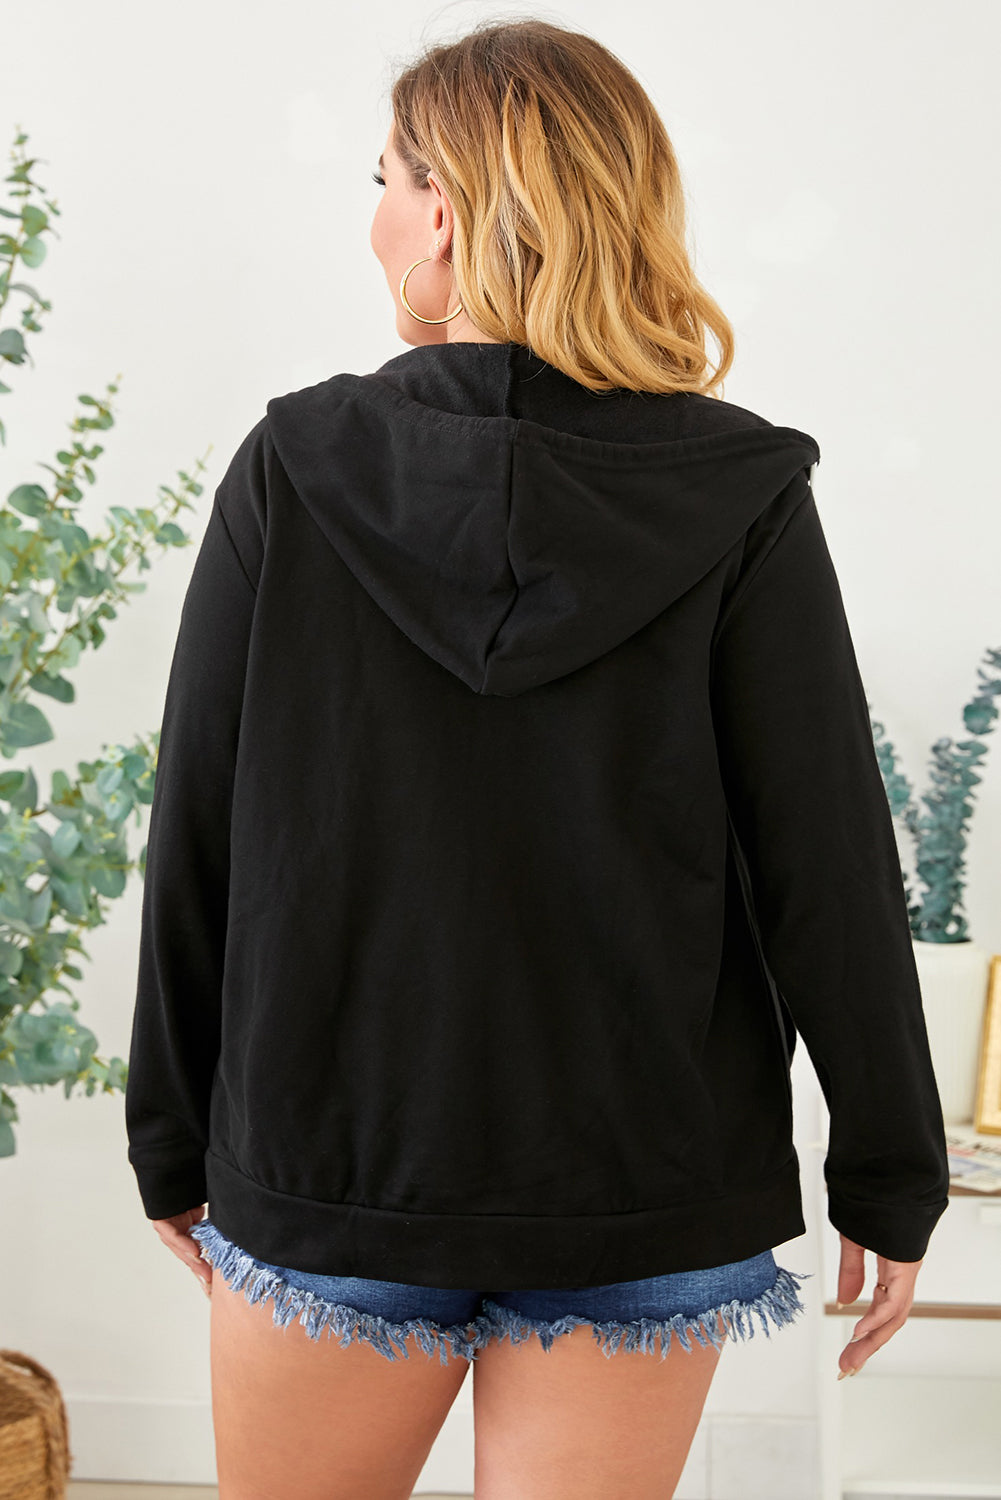 Plus Size Zip Up Hooded Jacket with Pocket